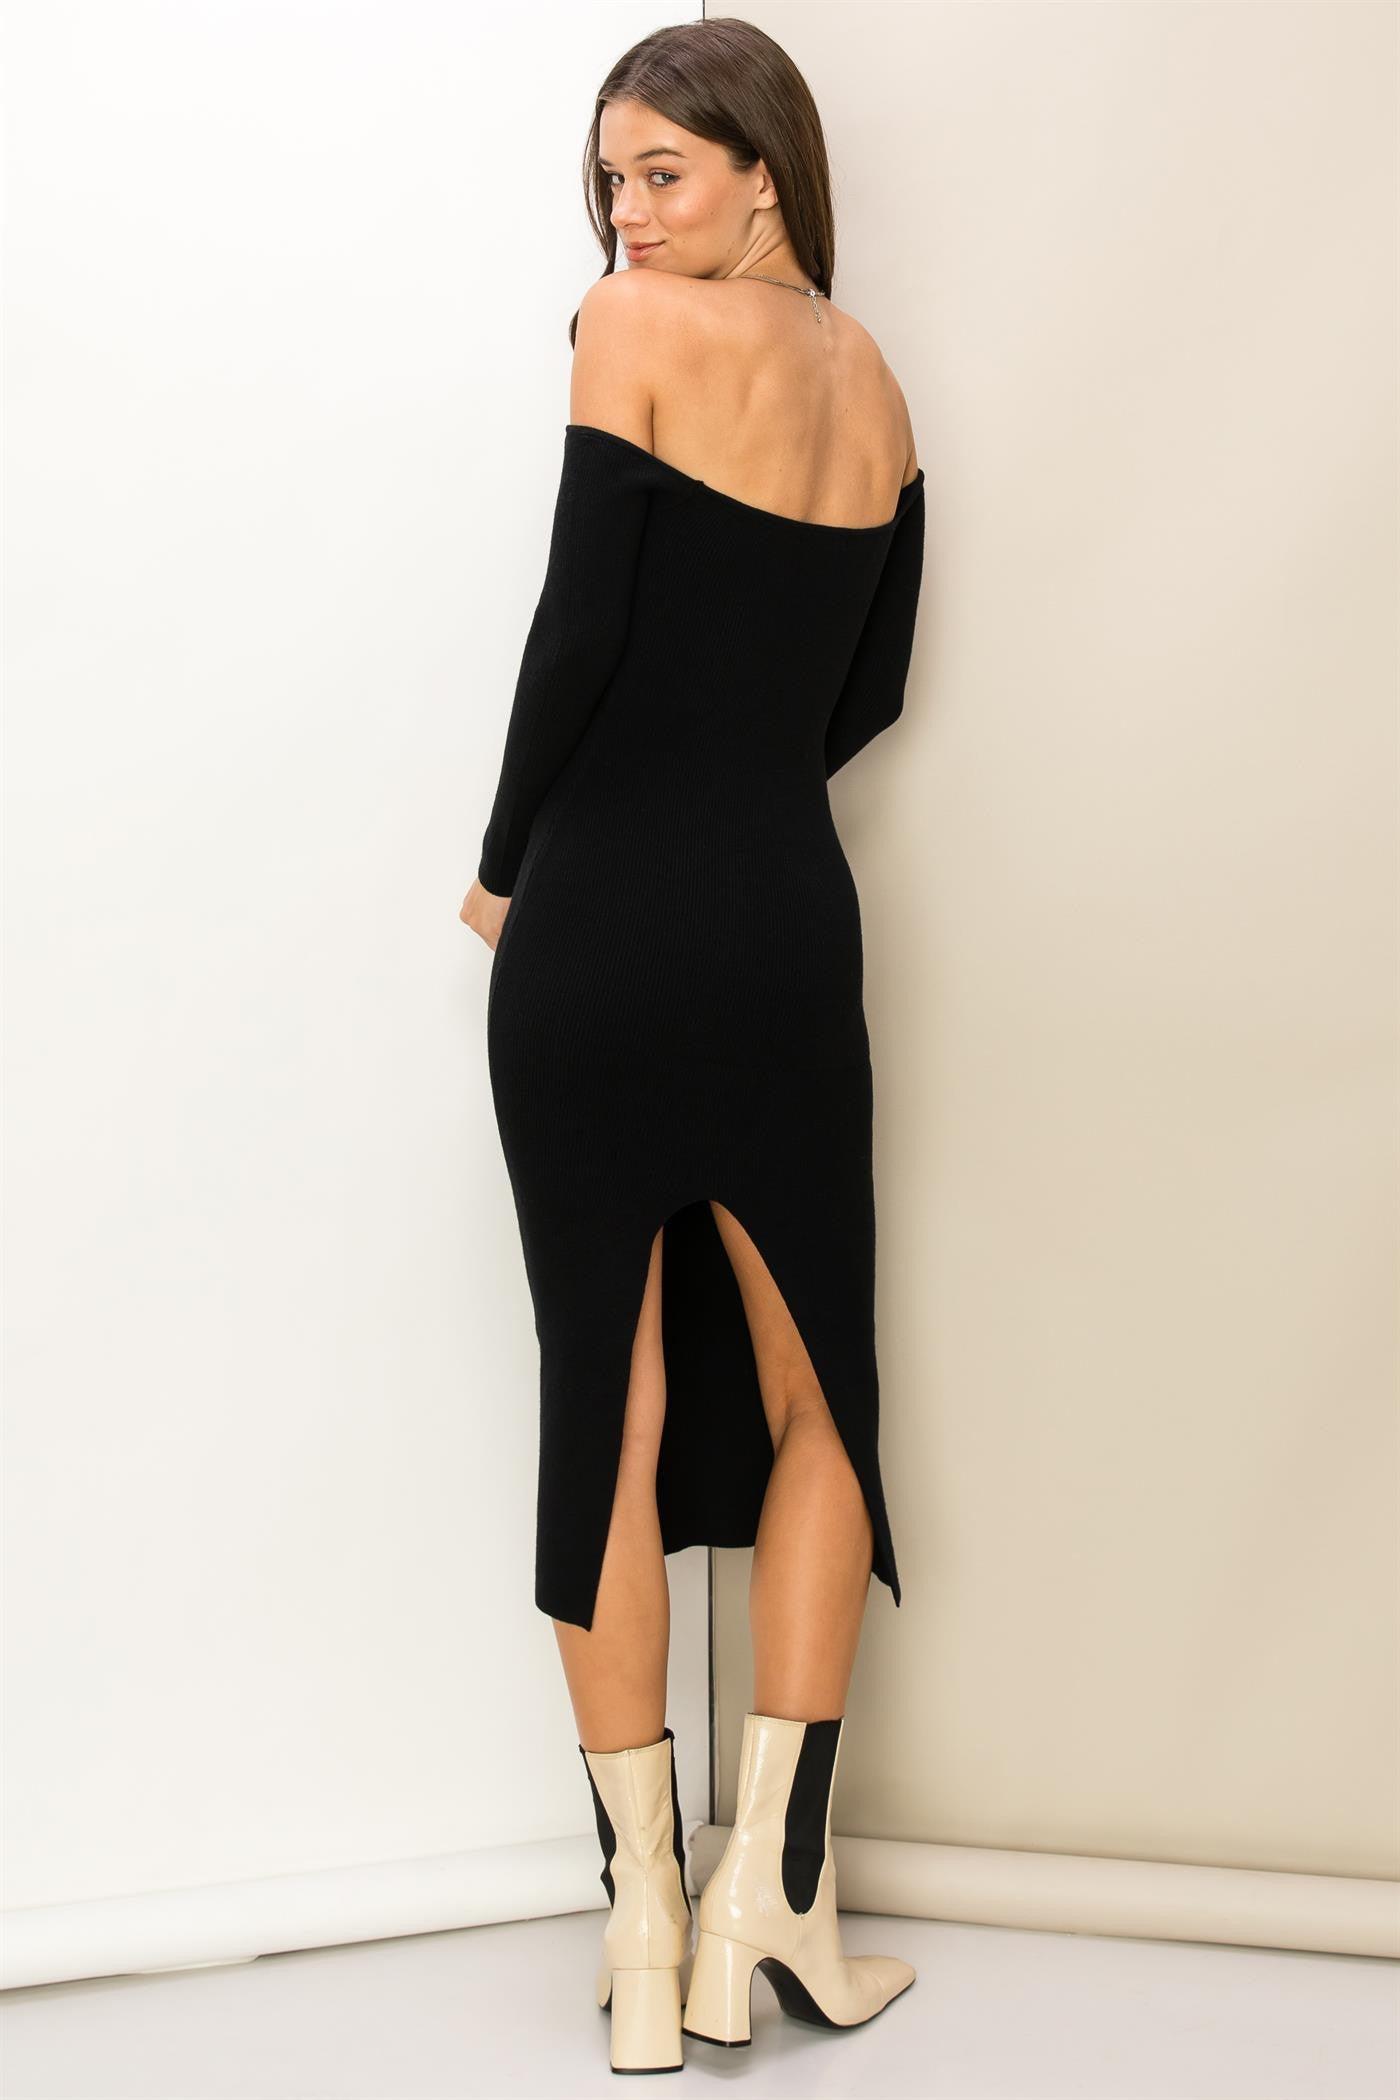 off the shoulder ribbed knit dress - RK Collections Boutique